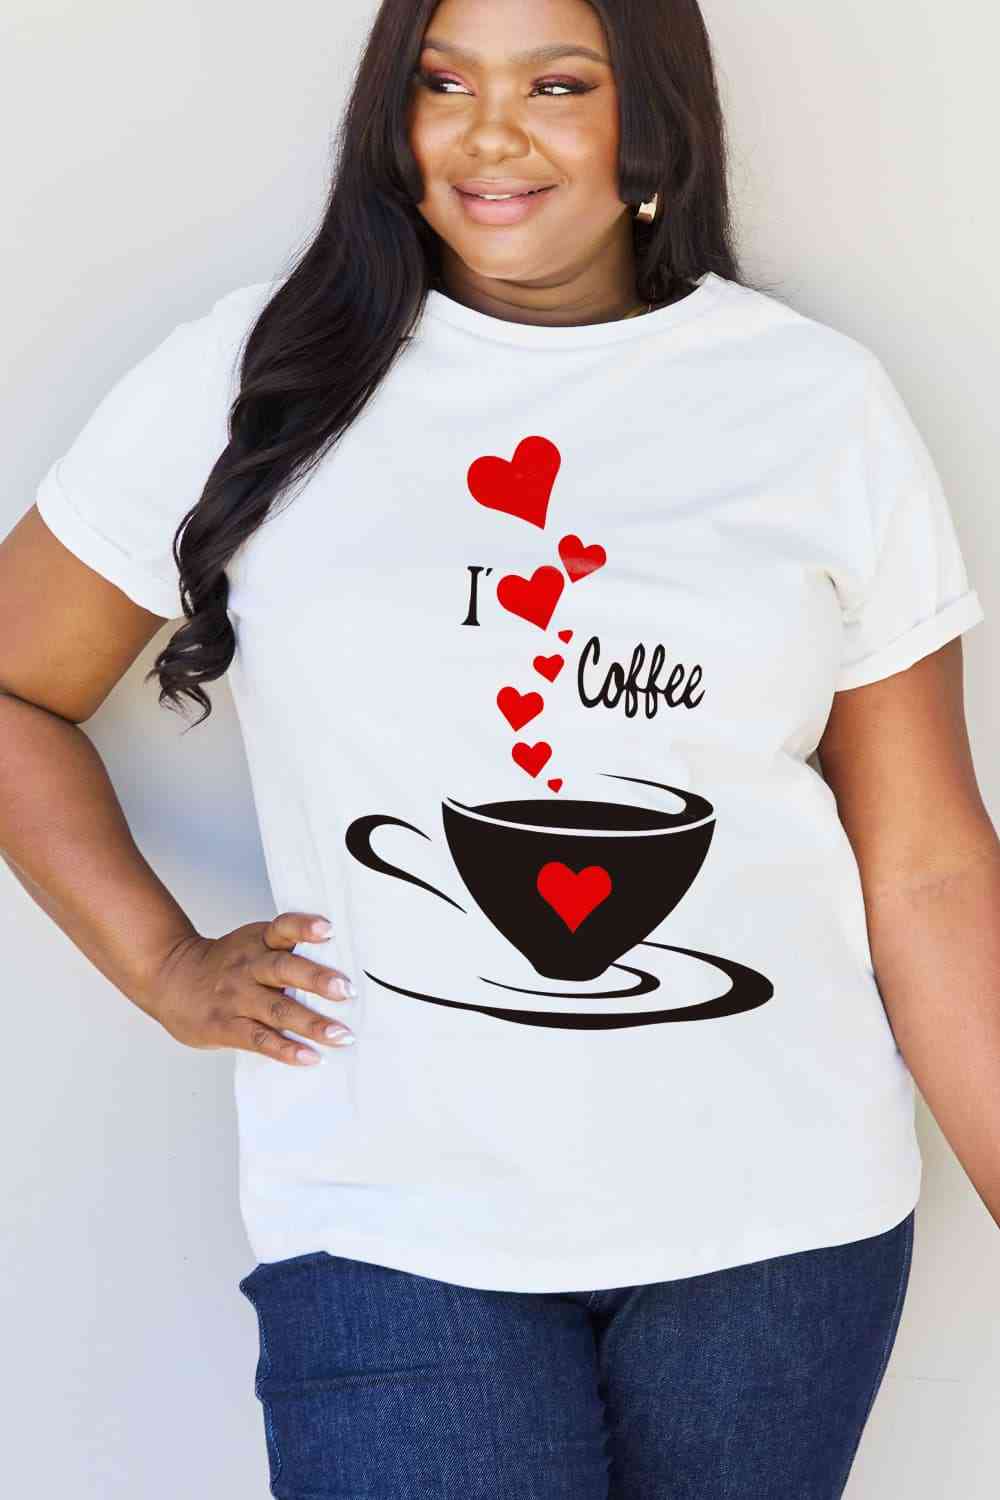 Simply Love Full Size I LOVE COFFEE Graphic Cotton Tee - TRENDMELO